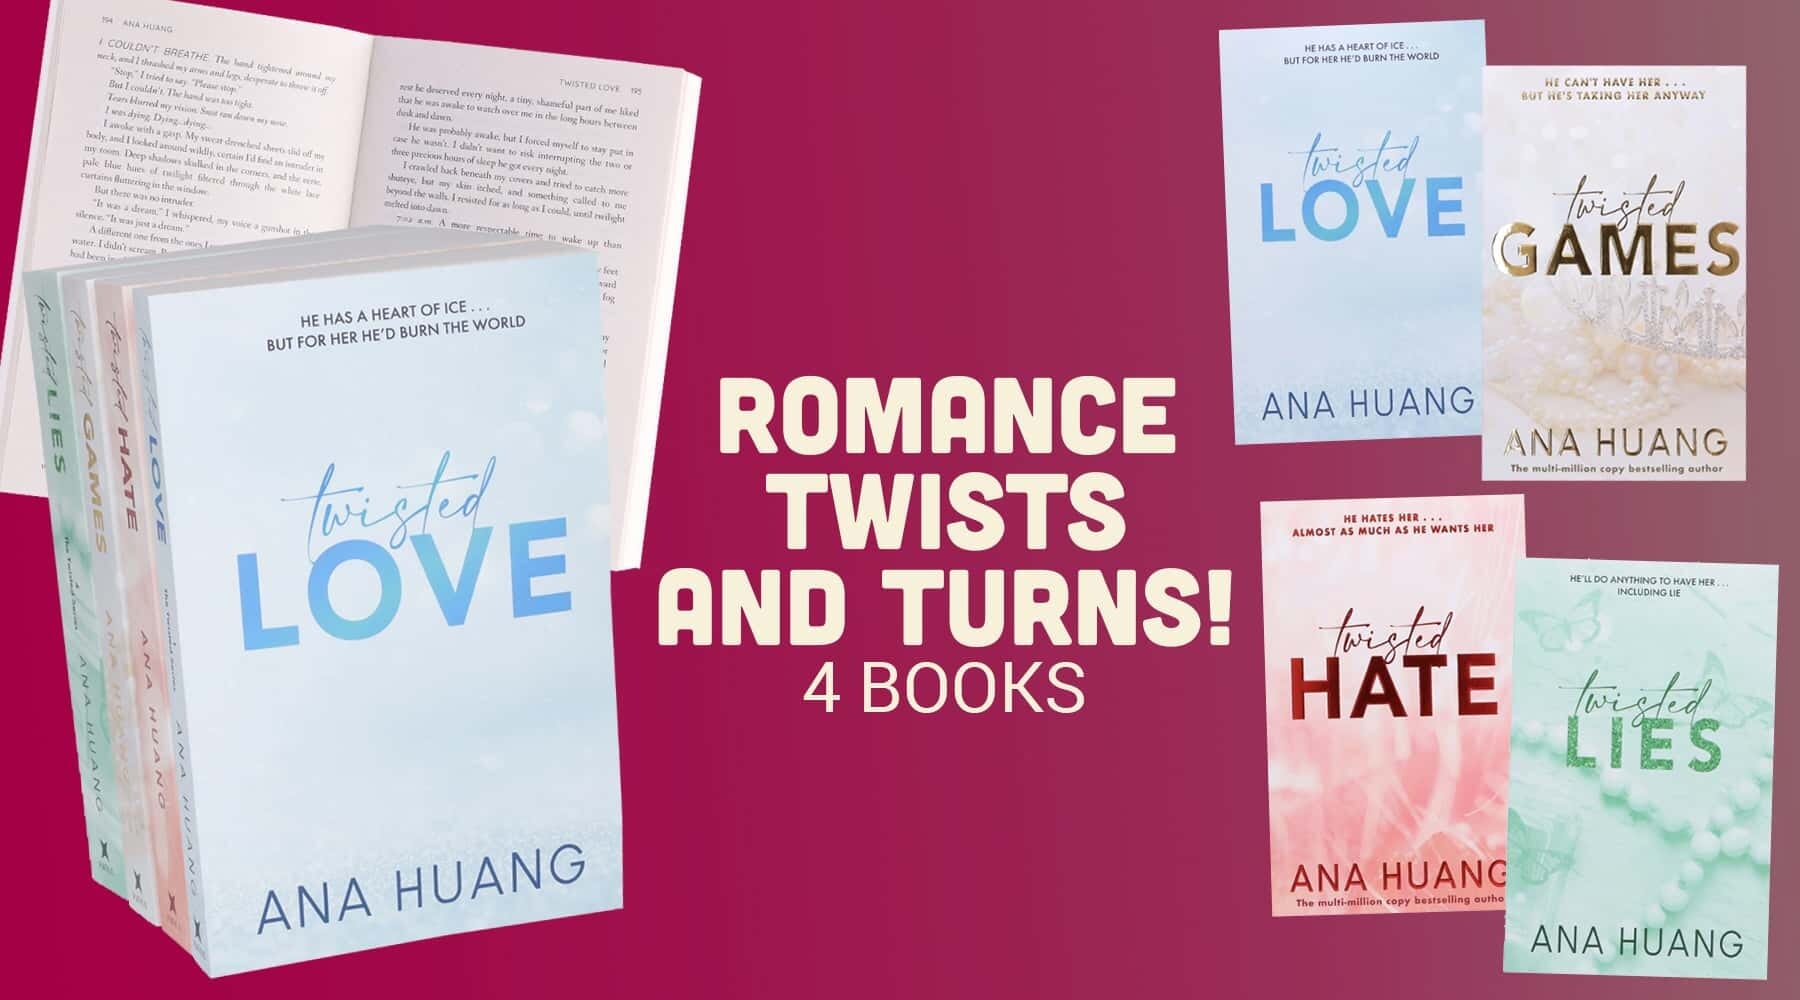 Twisted Hate Ana Huang Book Review and Summary